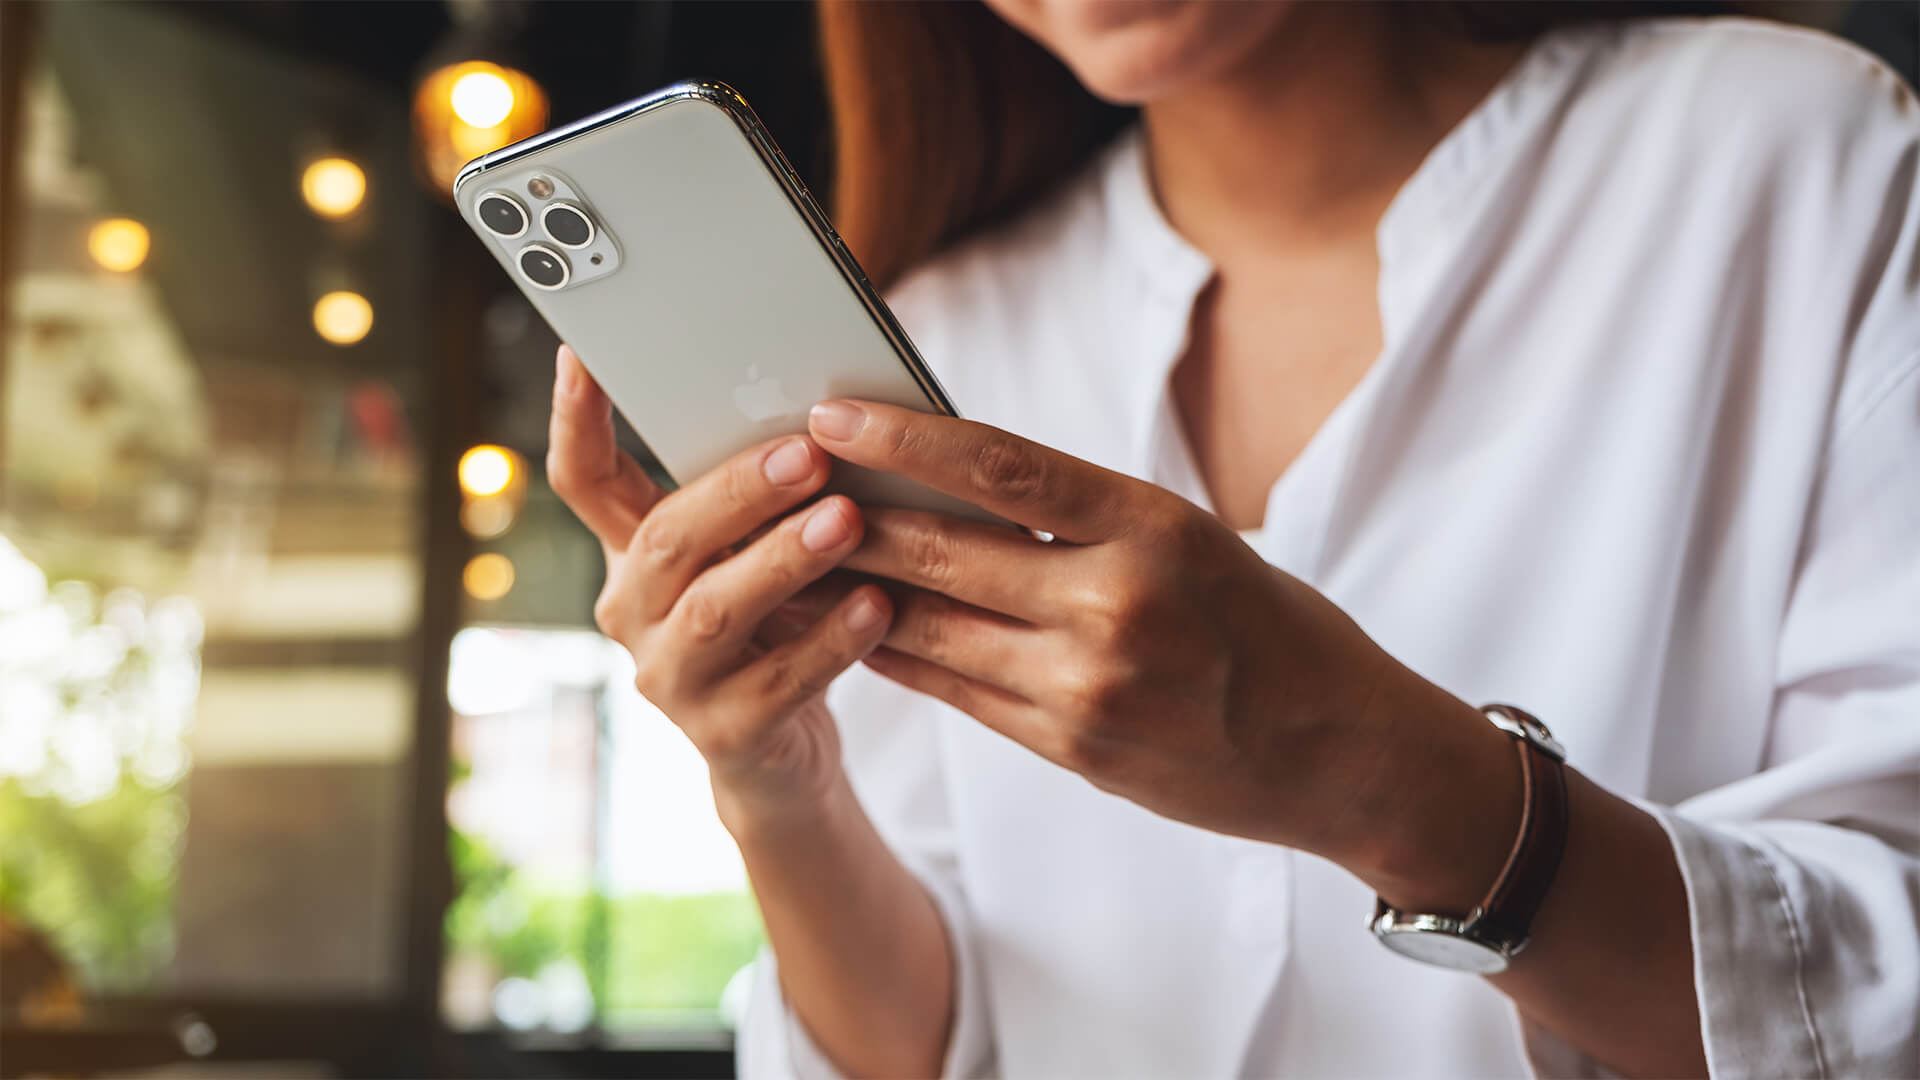 A woman holding and using Iphone 11 Pro Max smart phone